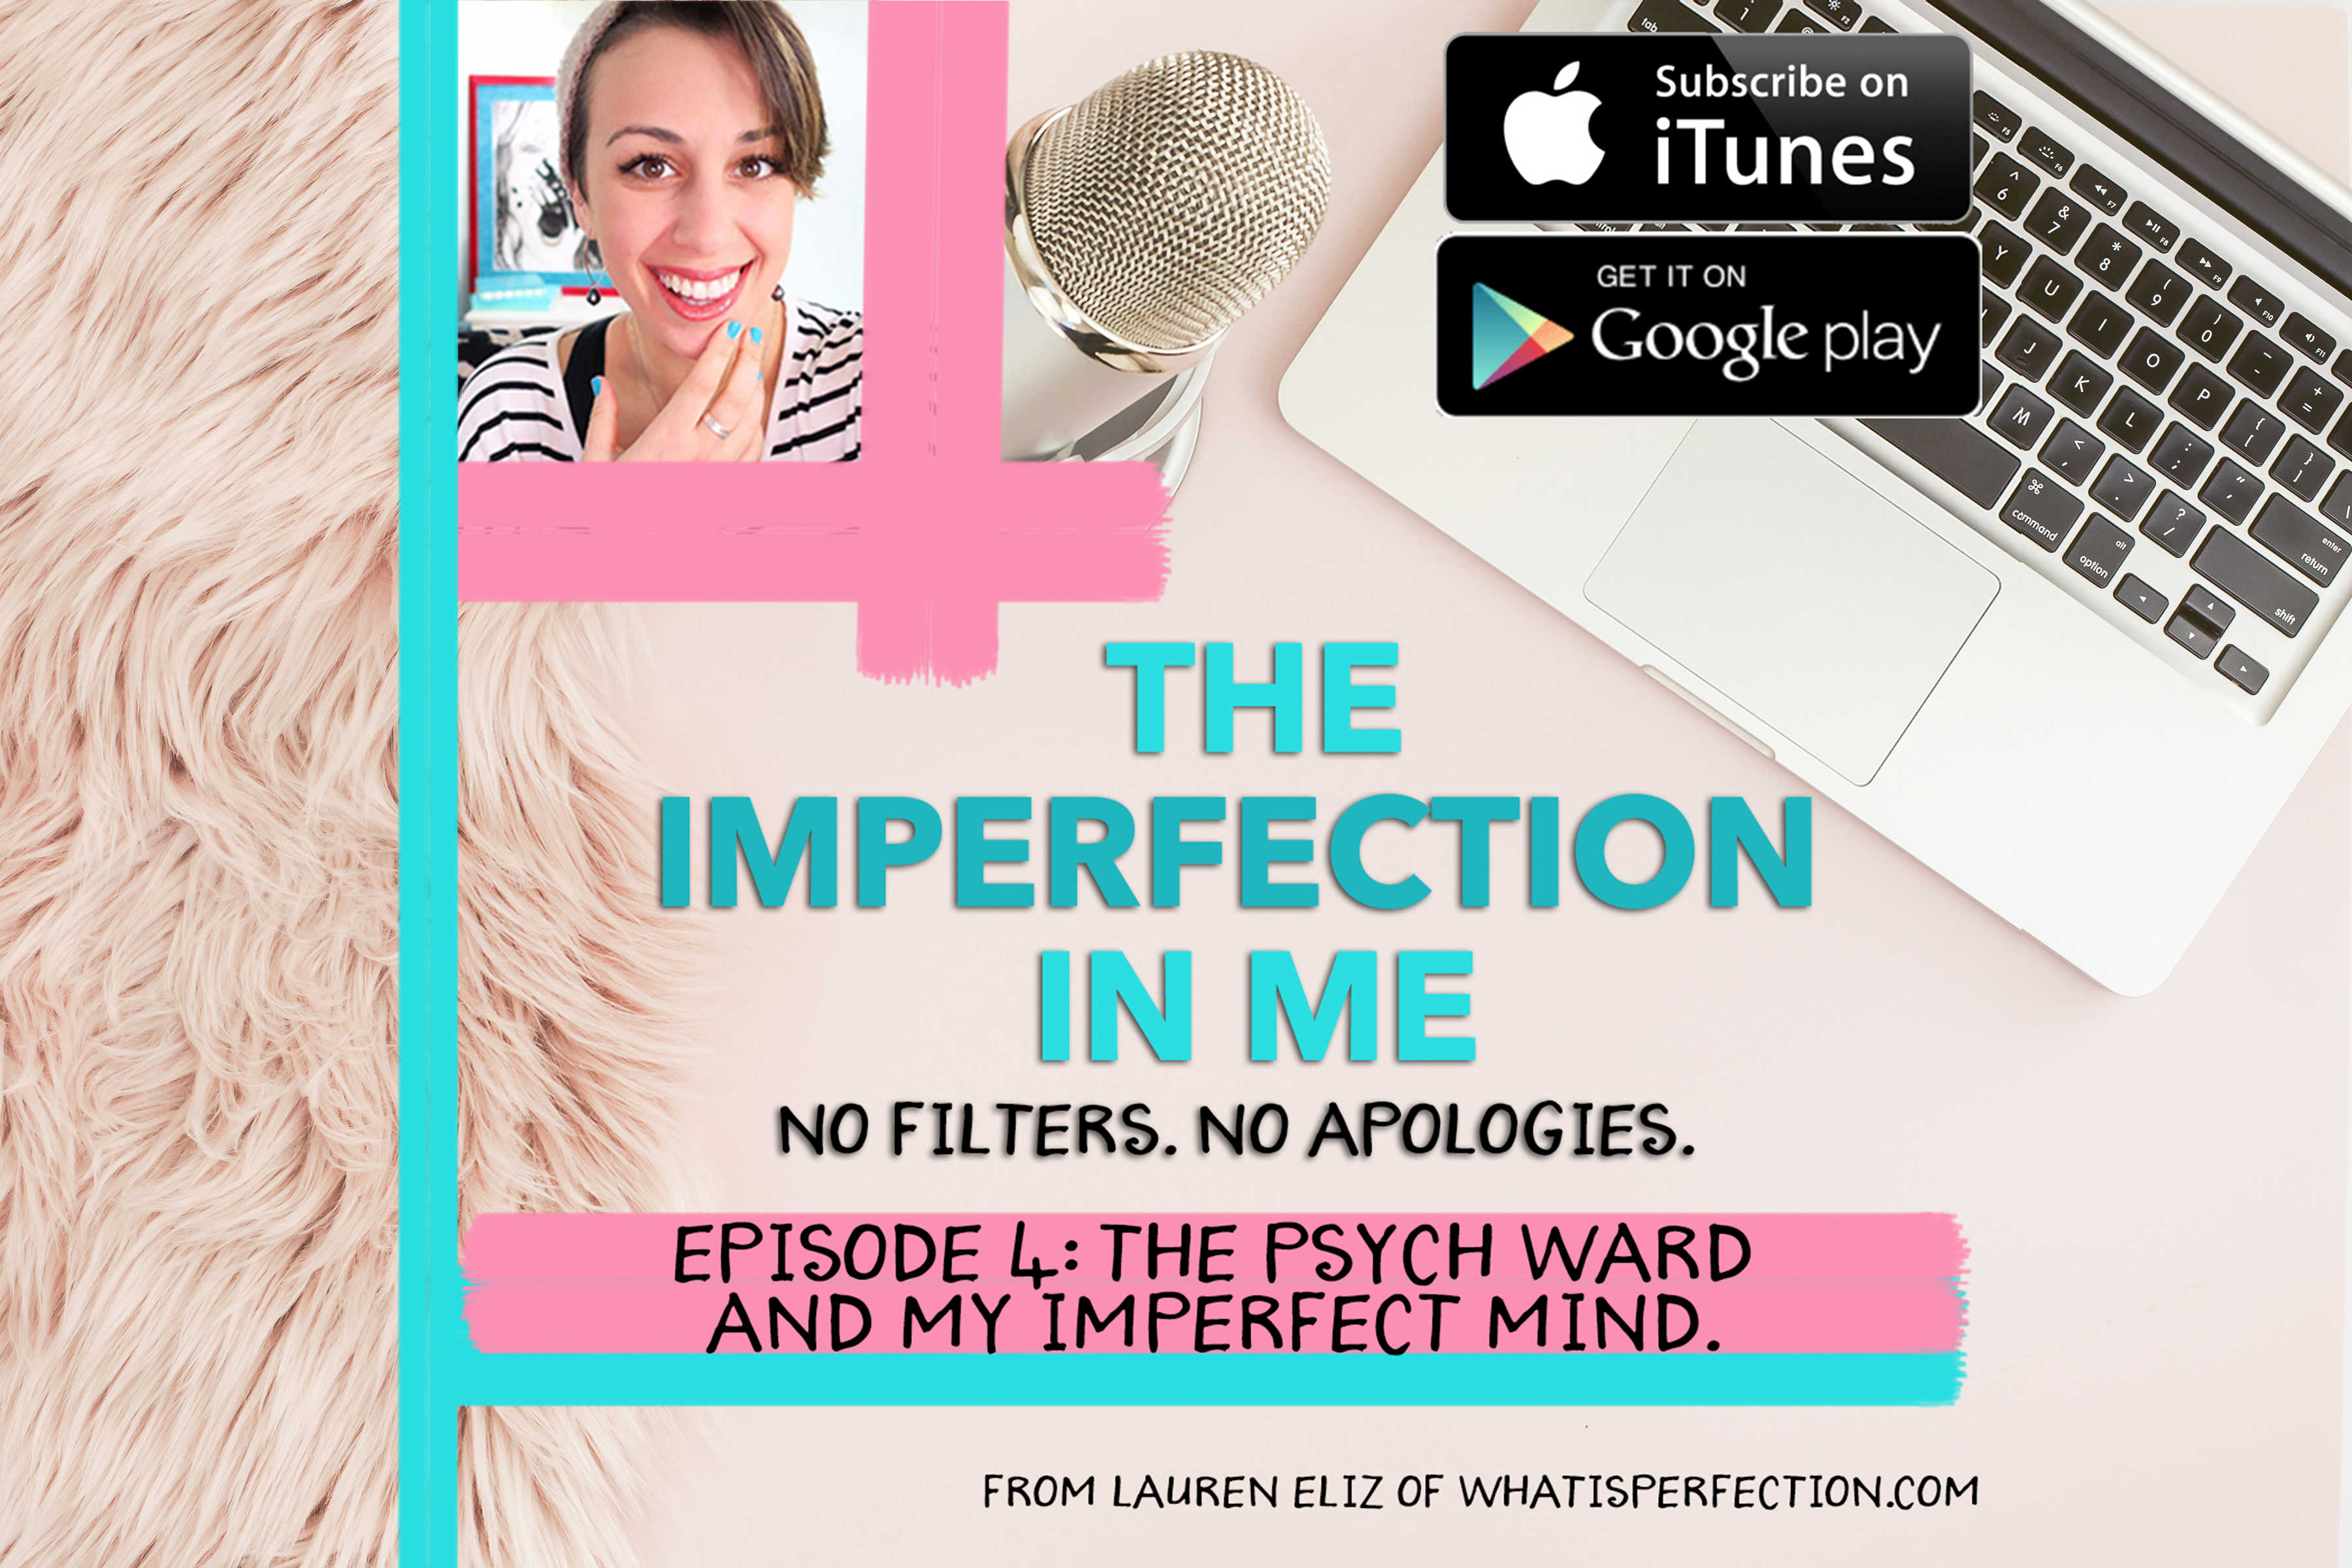 Episode 4: The Psych Ward and My Imperfect Mind.